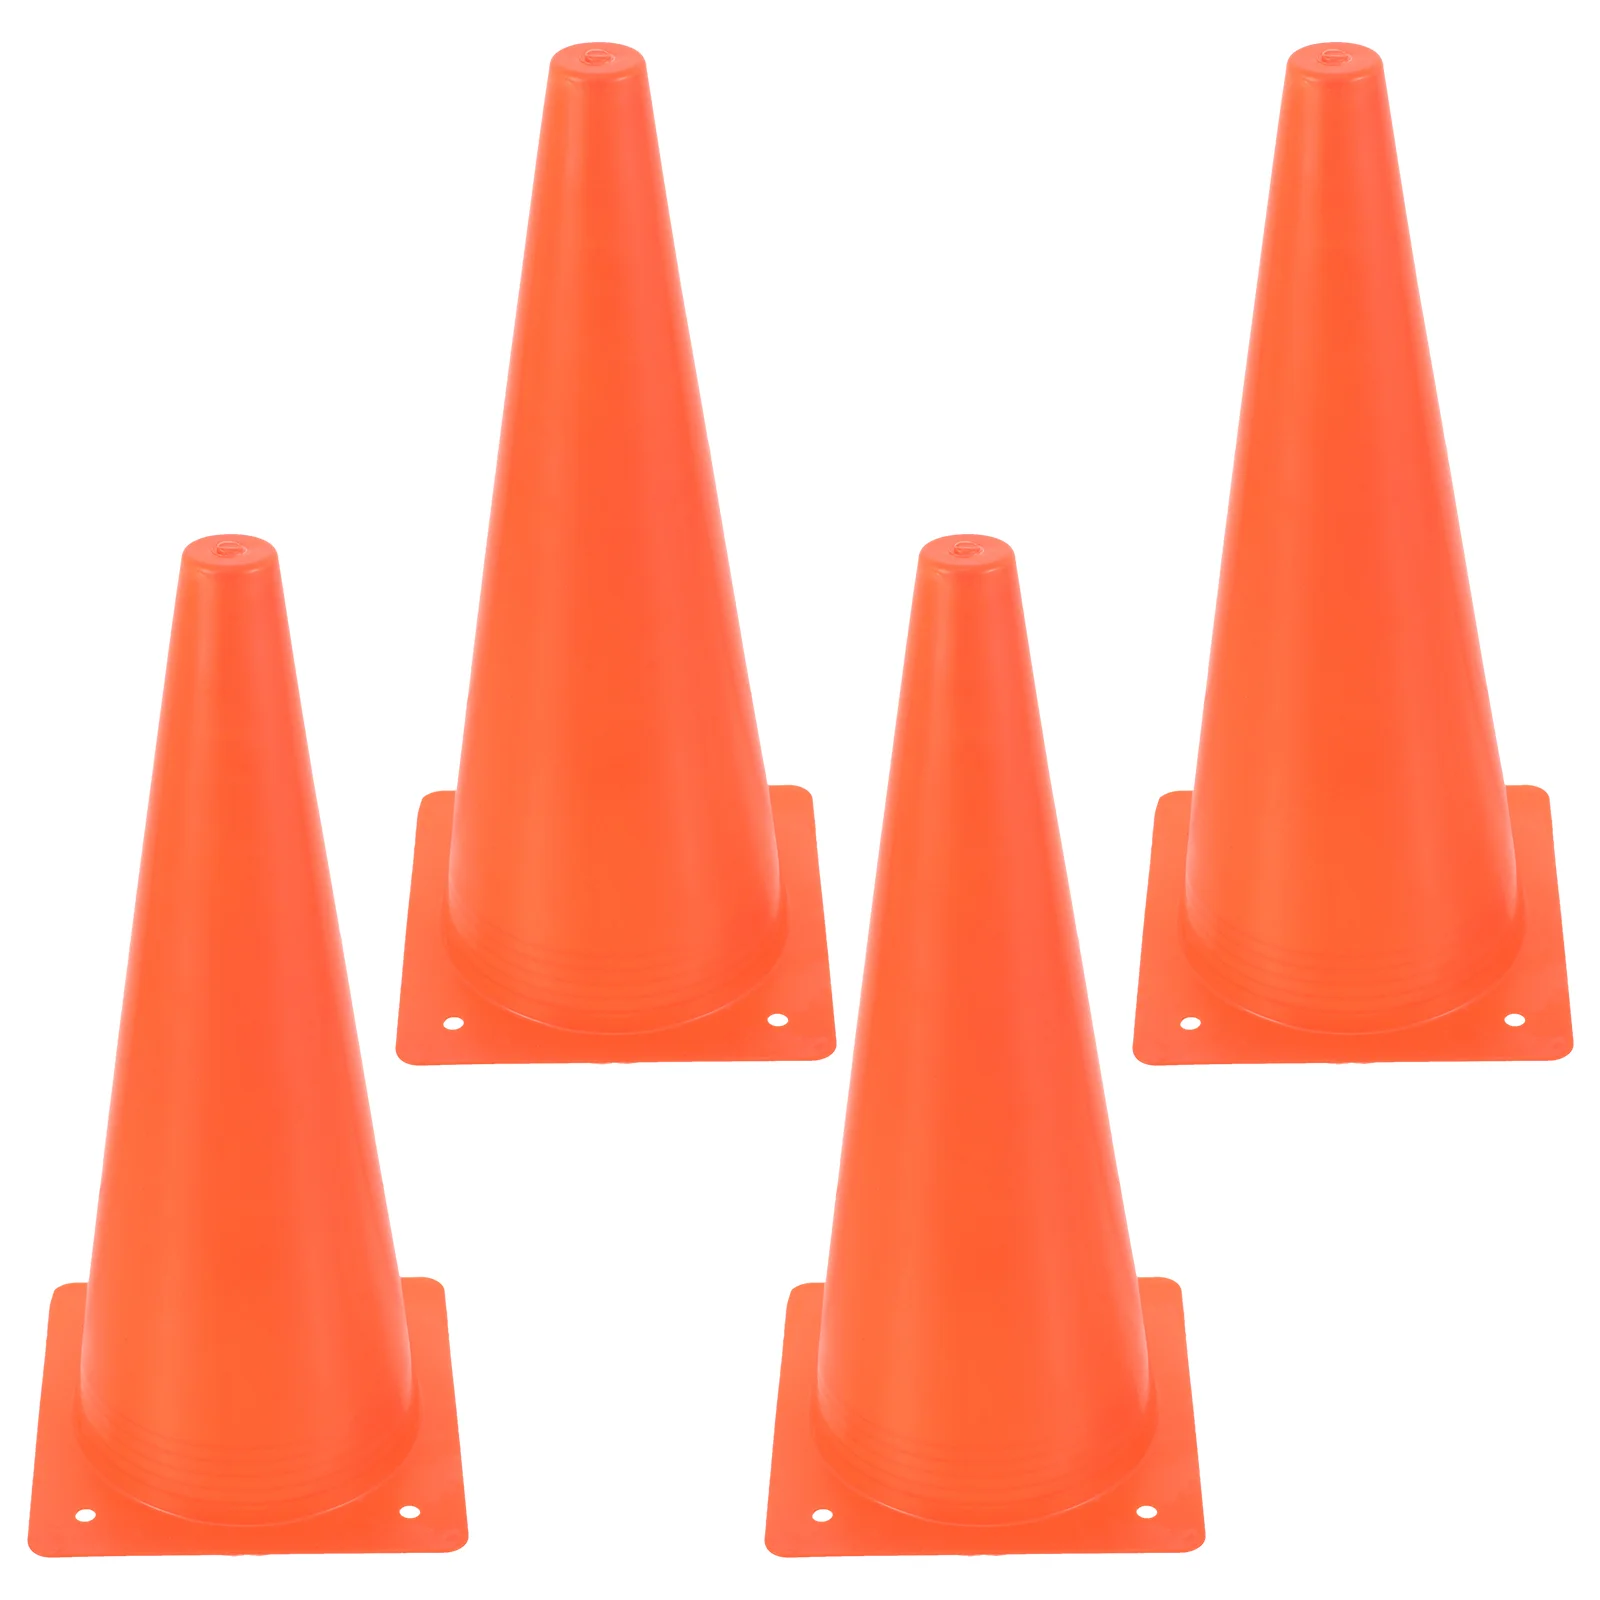 

4 Pcs Safety Cone Traffic Cones Soccer Foot Training Supplies Football Road Obstacle Sports